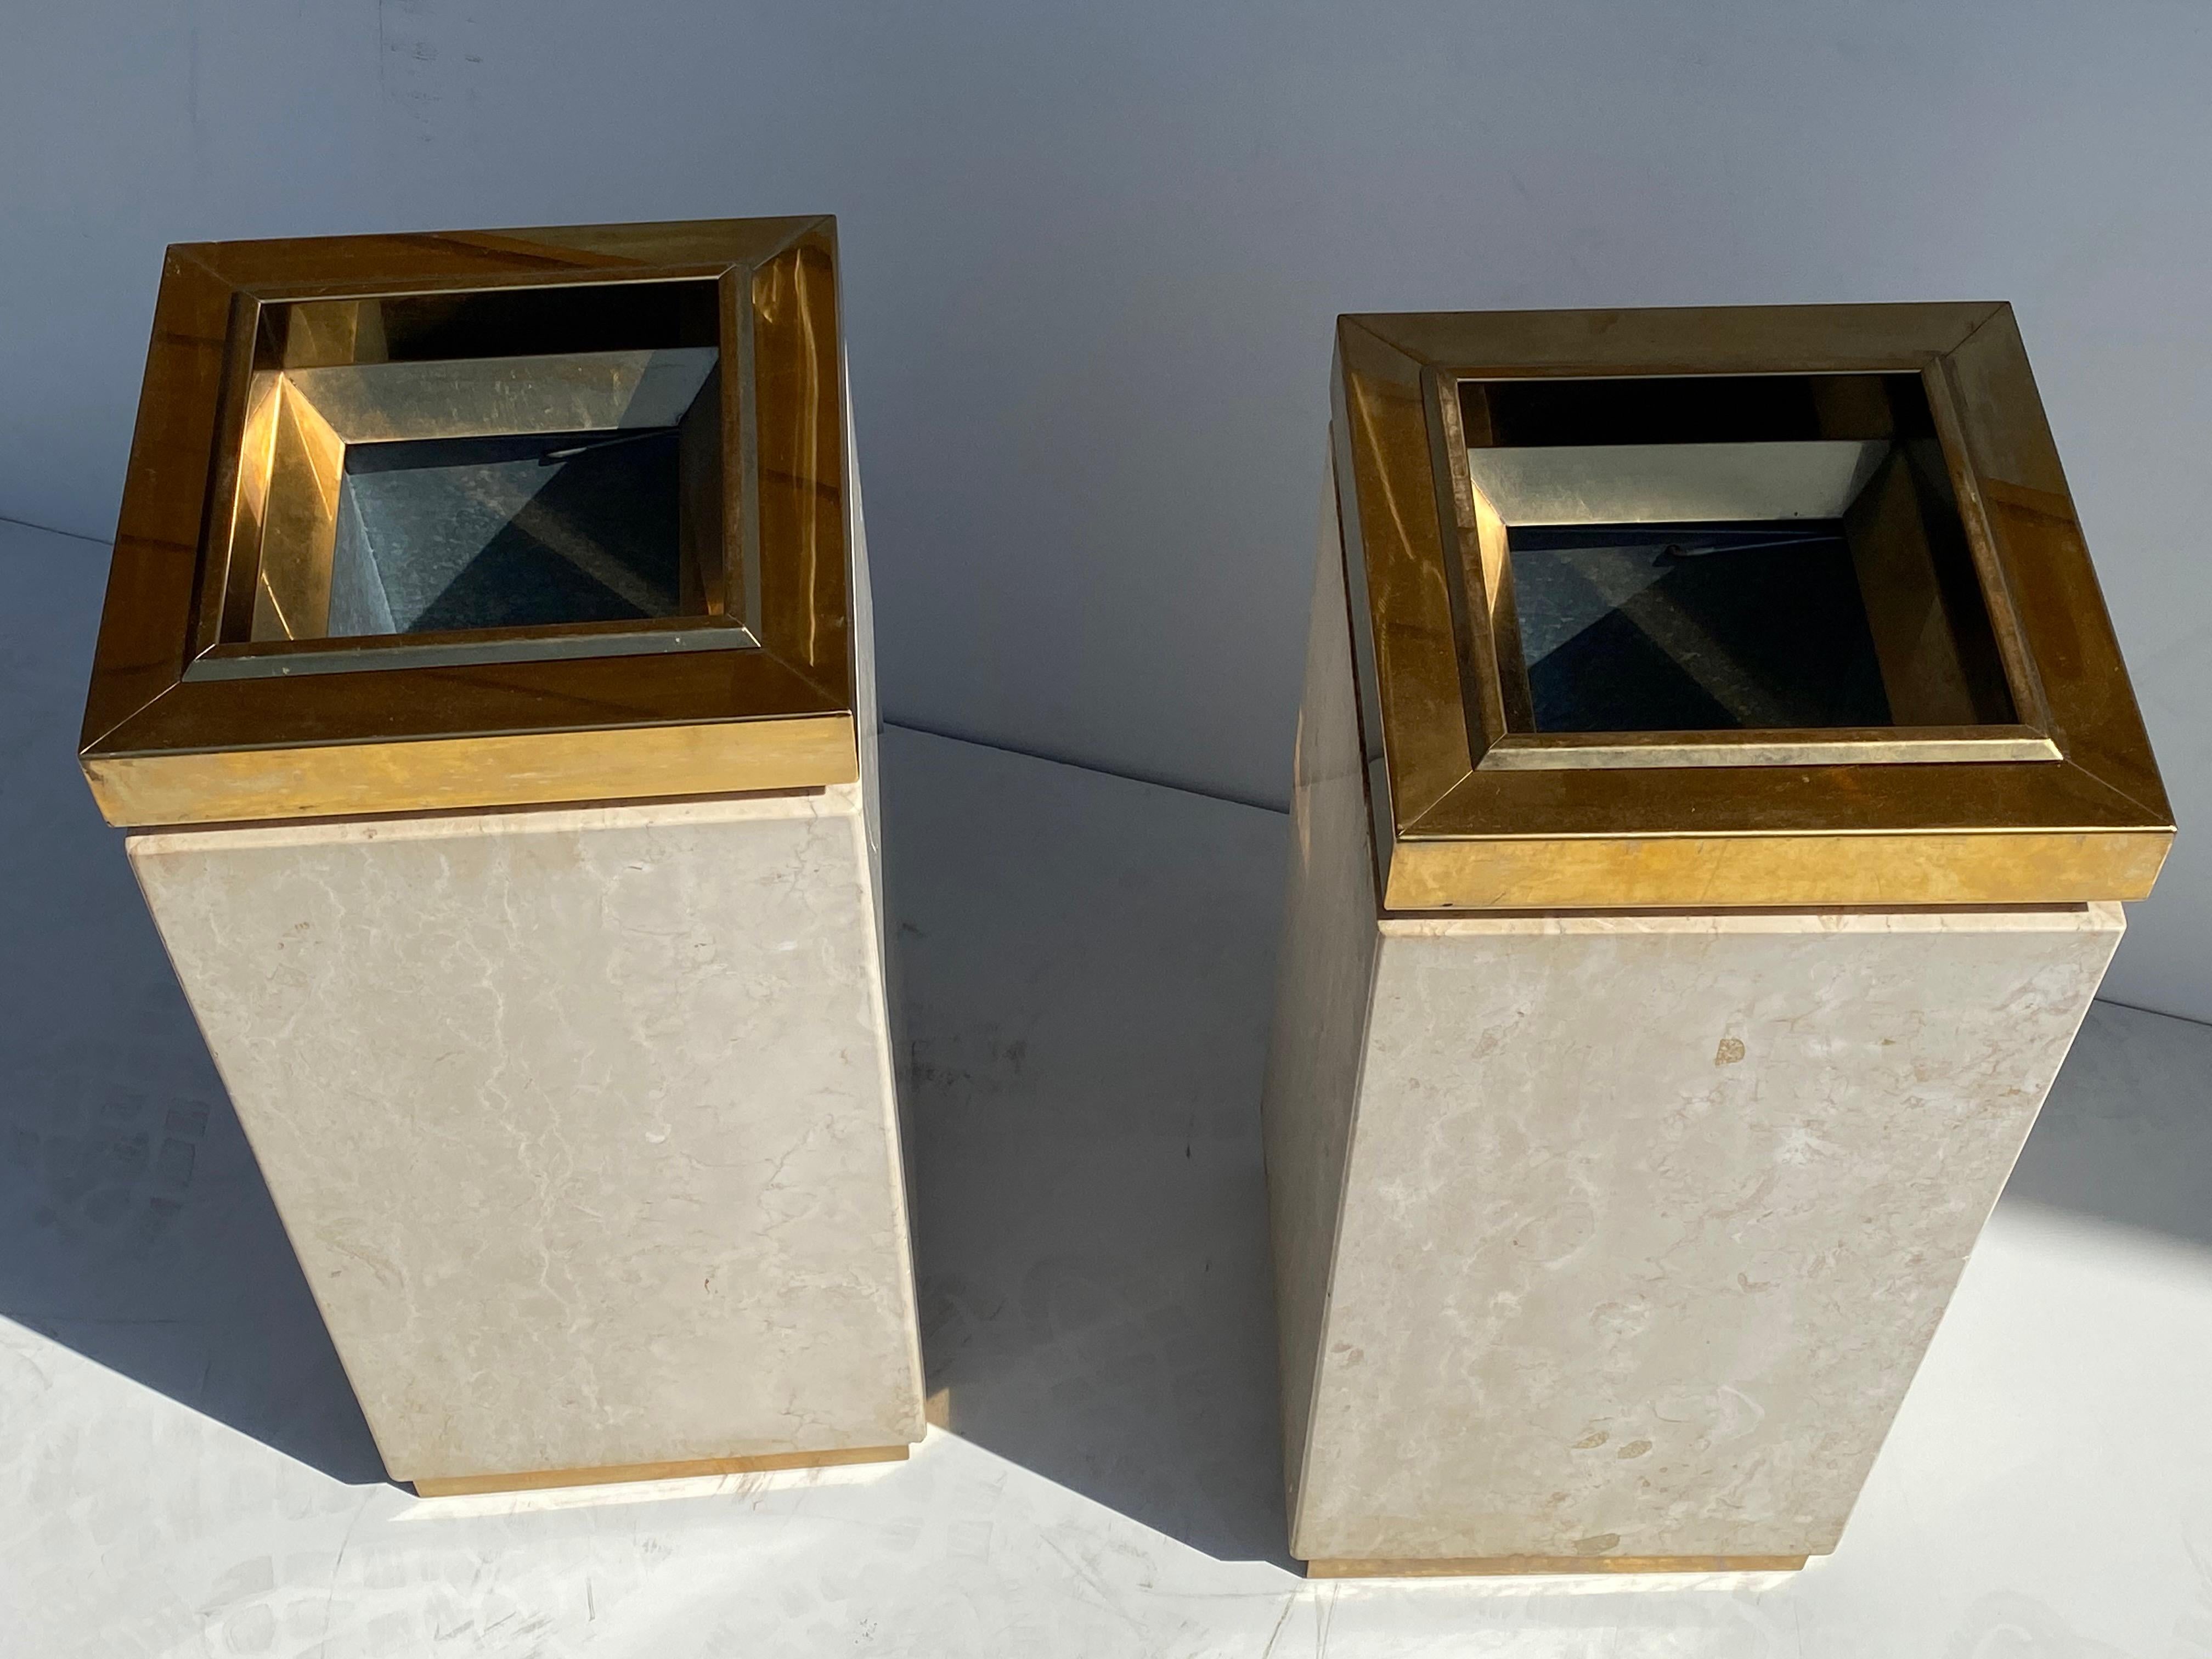 American Travertine and Brass Trash Cans / Planters